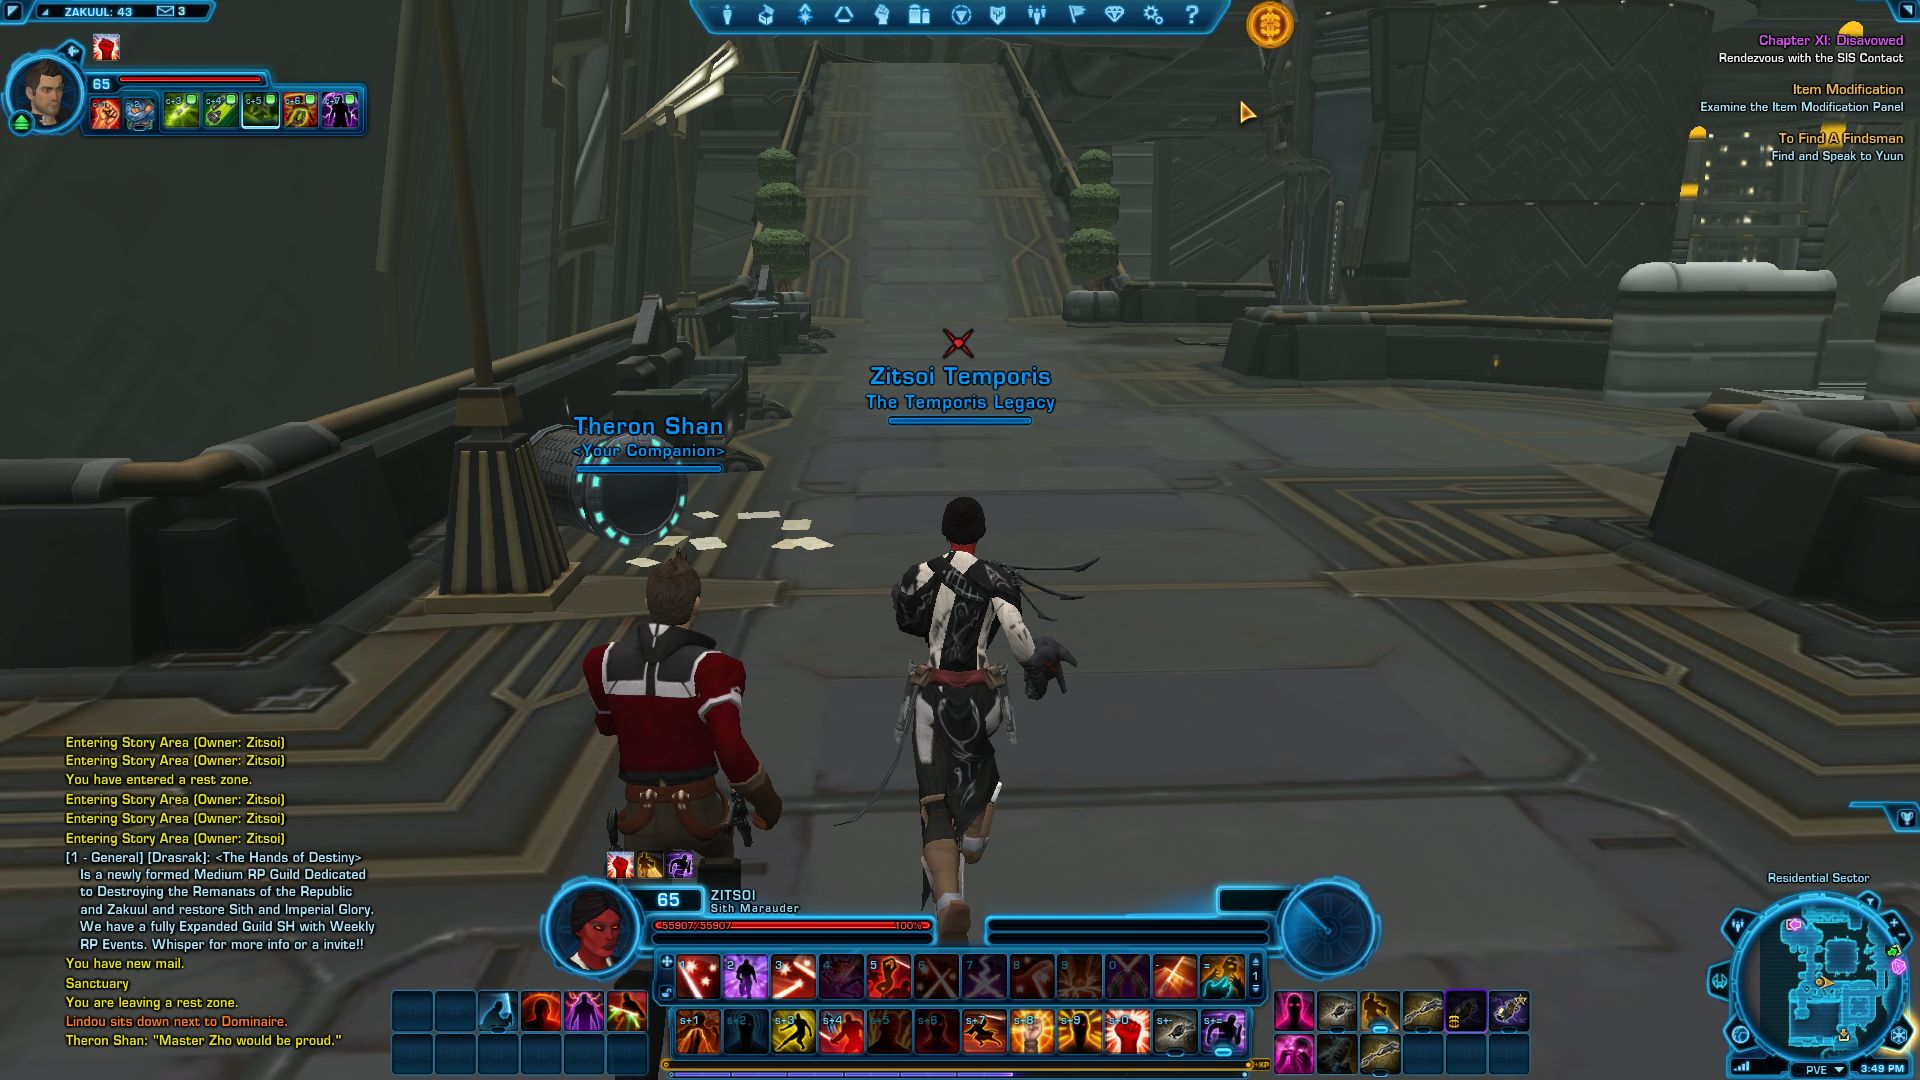 Amazoncom: Star Wars: The Old Republic - PC: Video Games